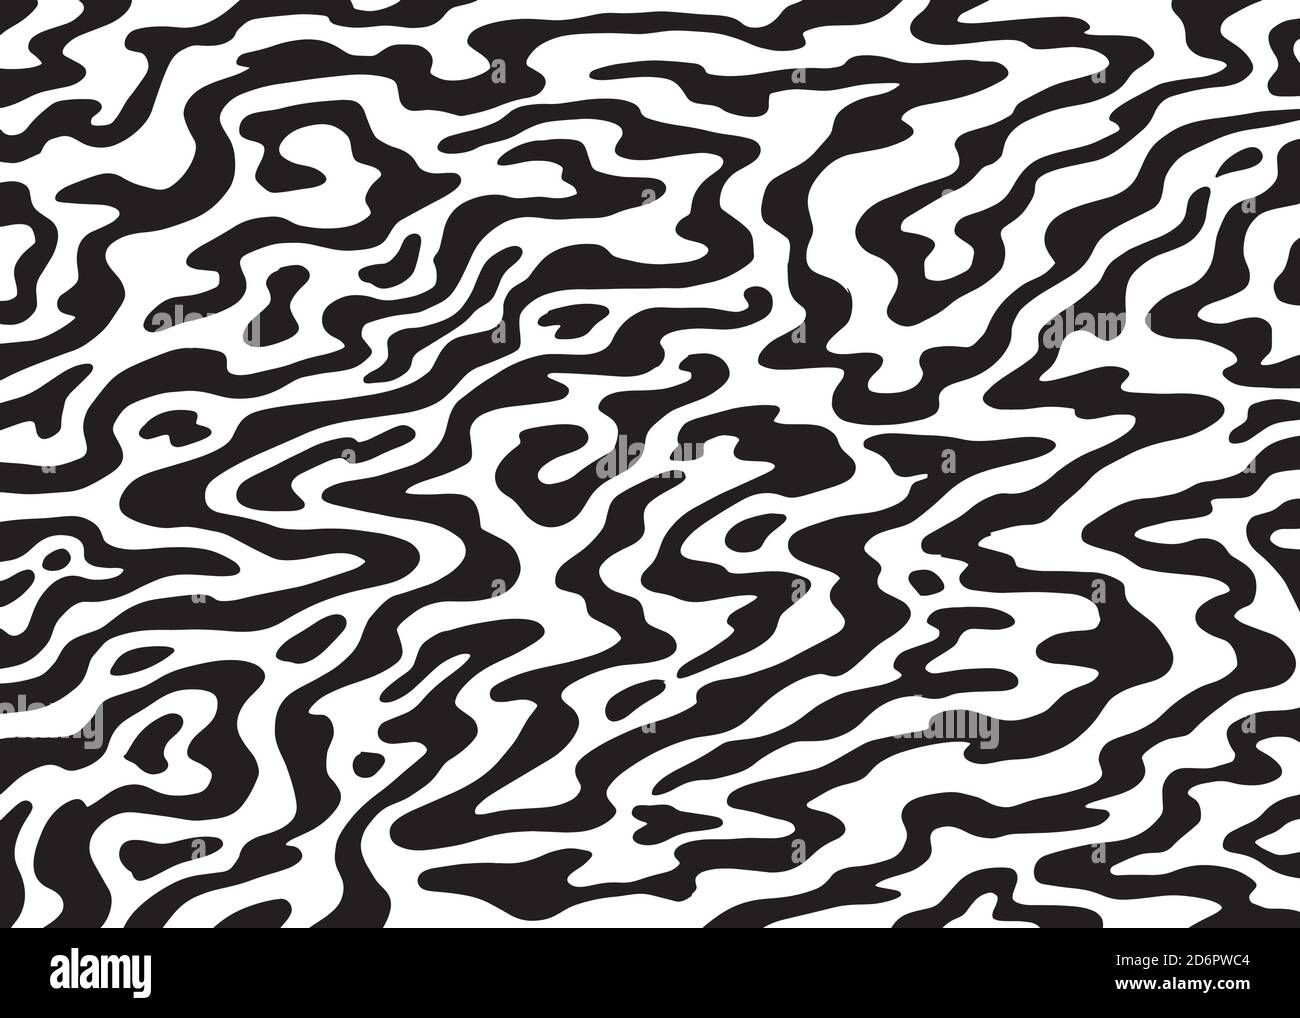 Psychedelic Abstract Background. Black and white pattern. Vector illustration for surface design, print, poster, icon, web, graphic designs. Stock Vector